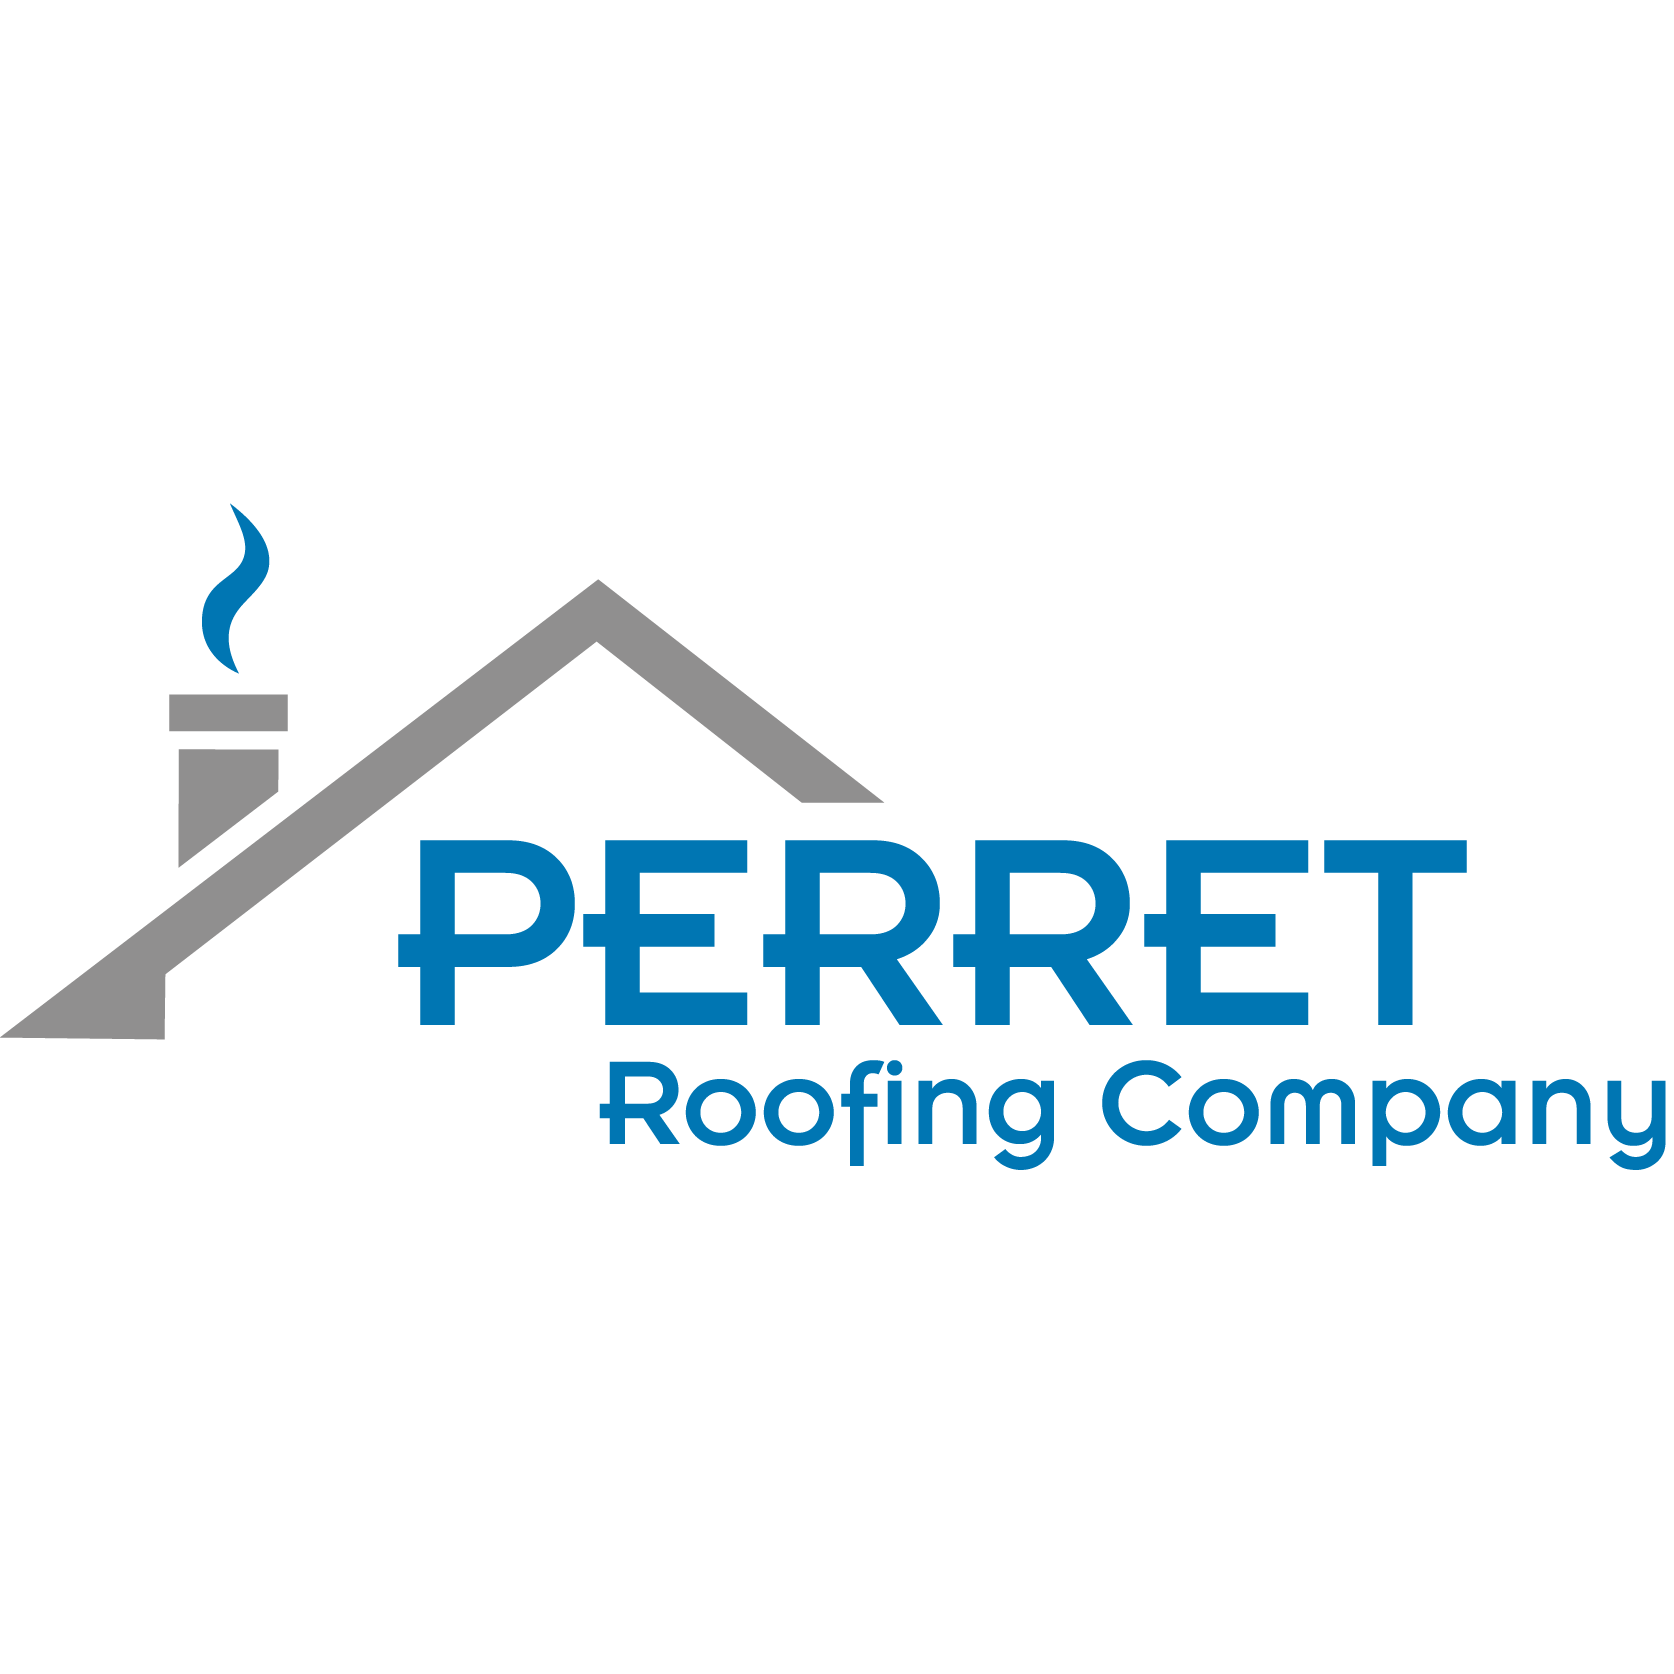 Perret Roofing